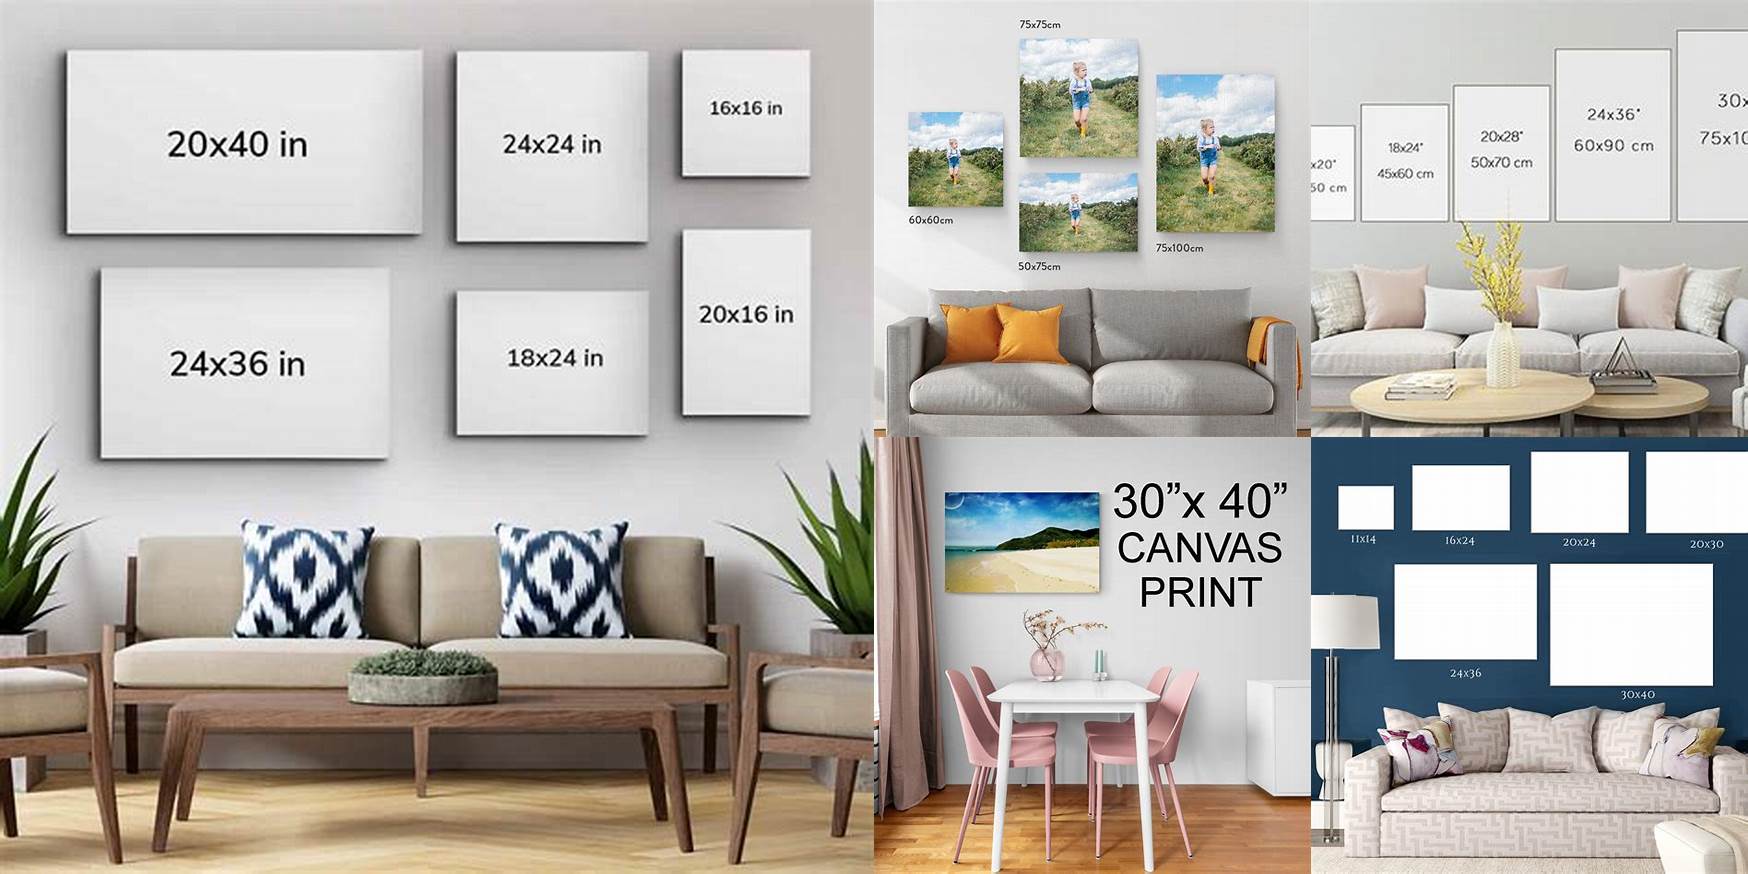 How Big Is 30X40 Canvas